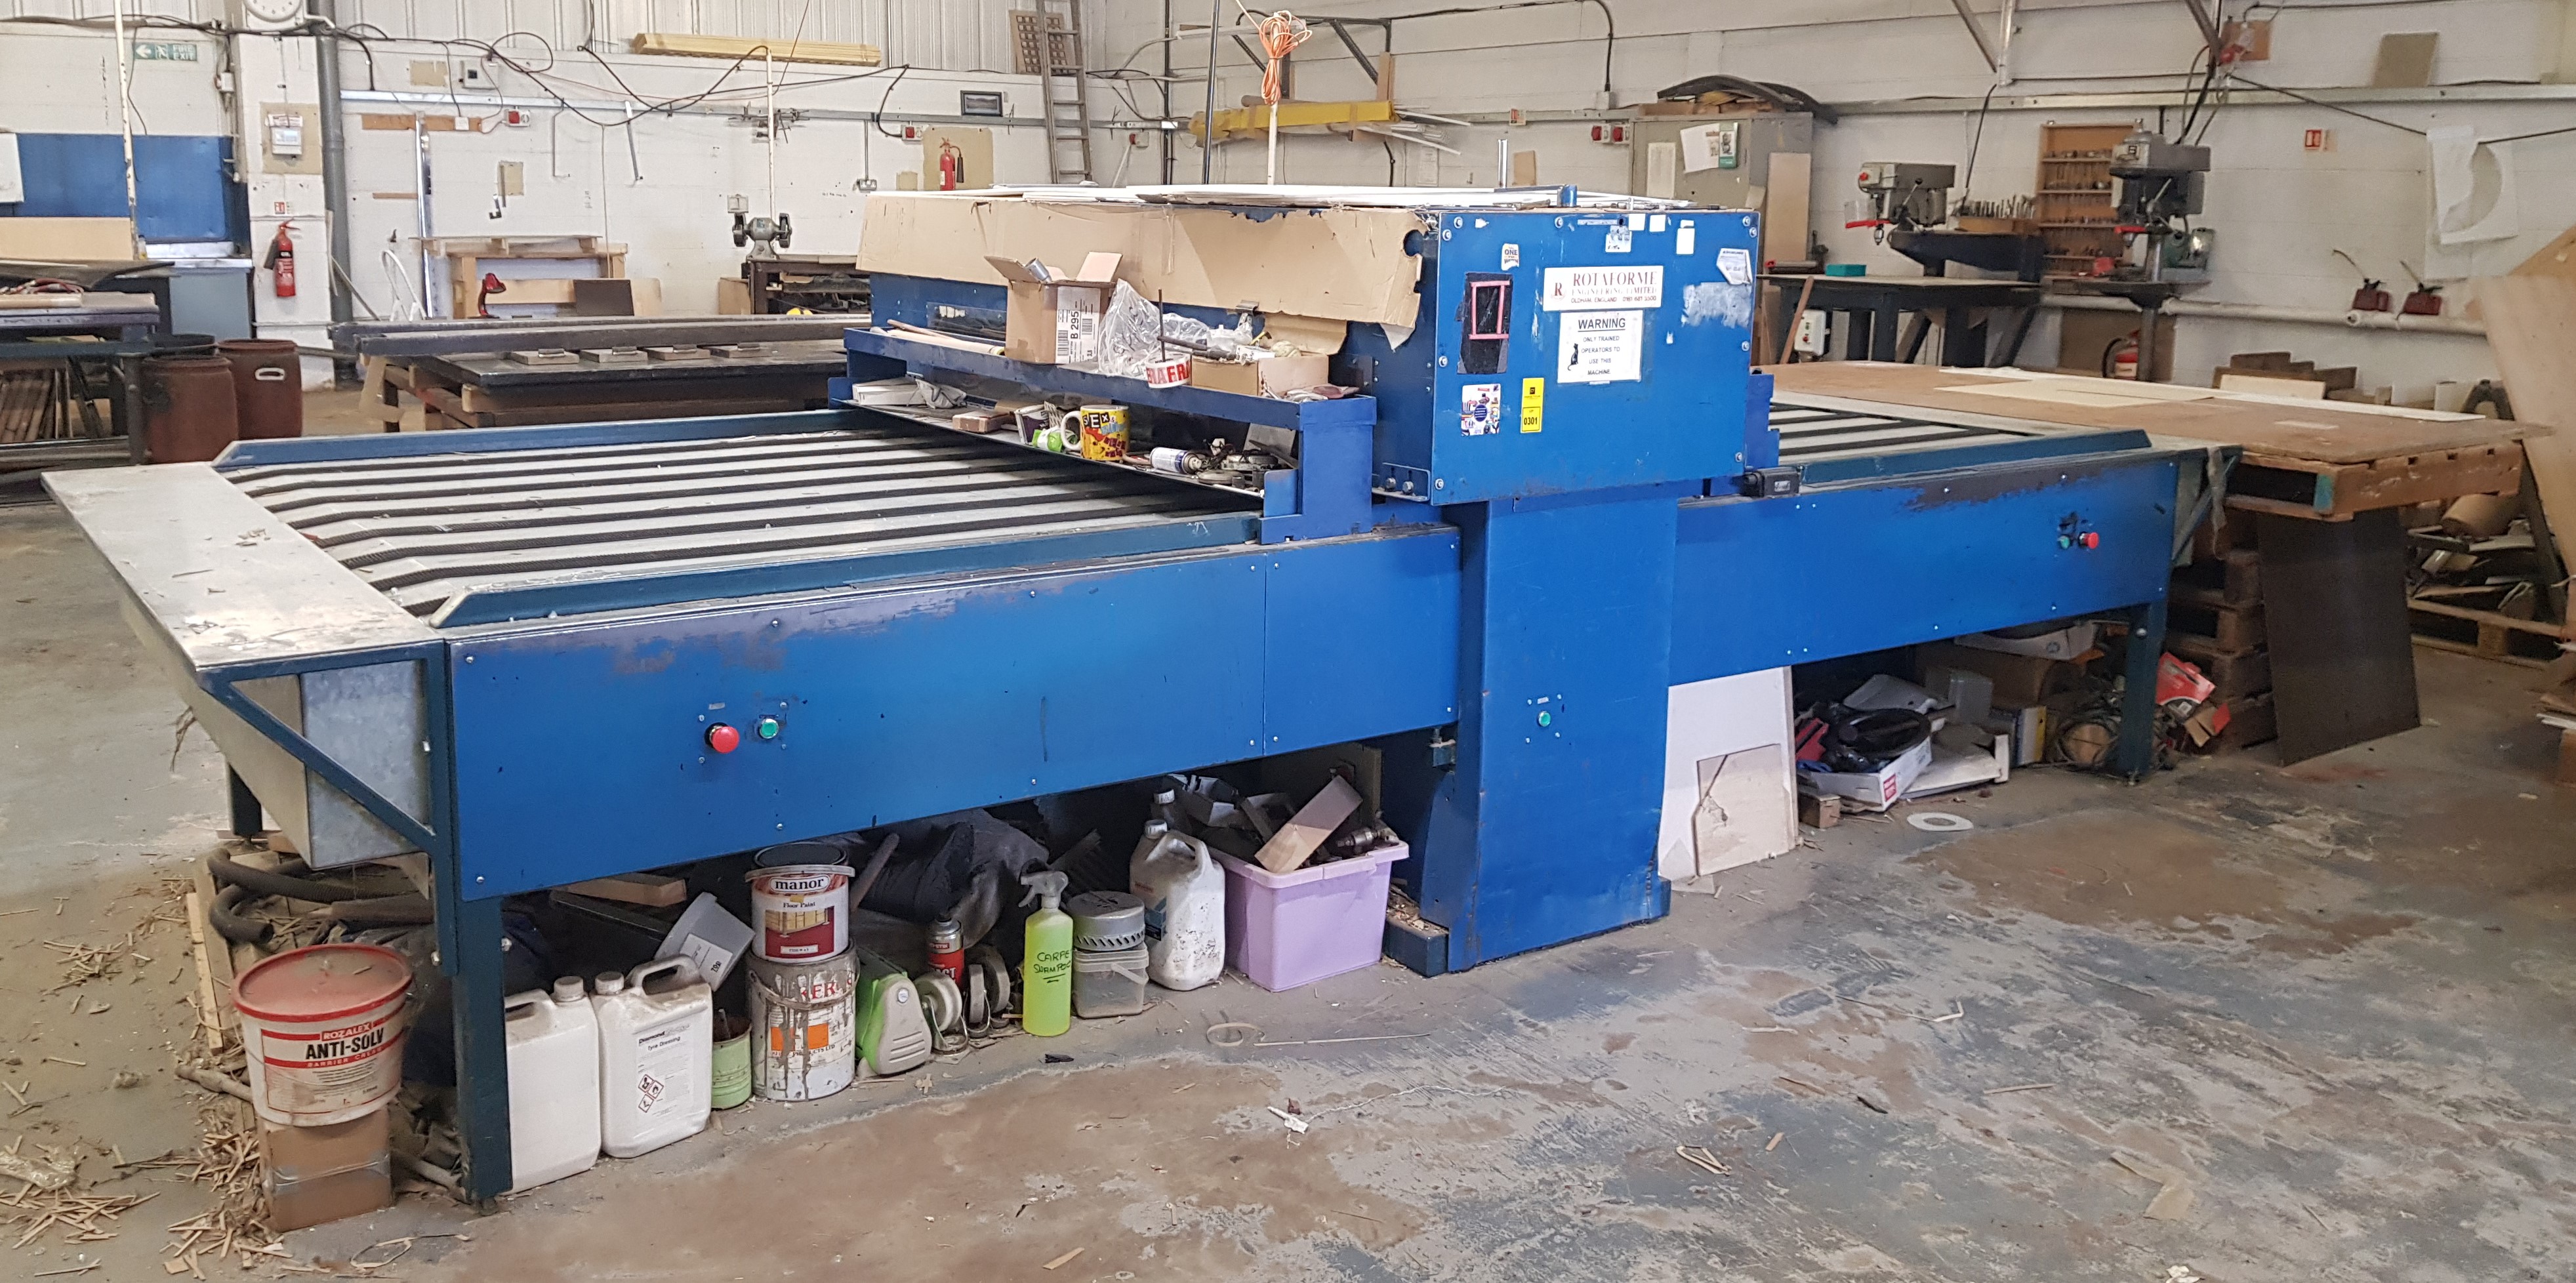 CUSTOM BUILT 70 ROTA FORM ROLLER PRESS WITH GEAR DRIVEN TOP ROLLER AND AUTO STOP FEATURE *** NOTE: